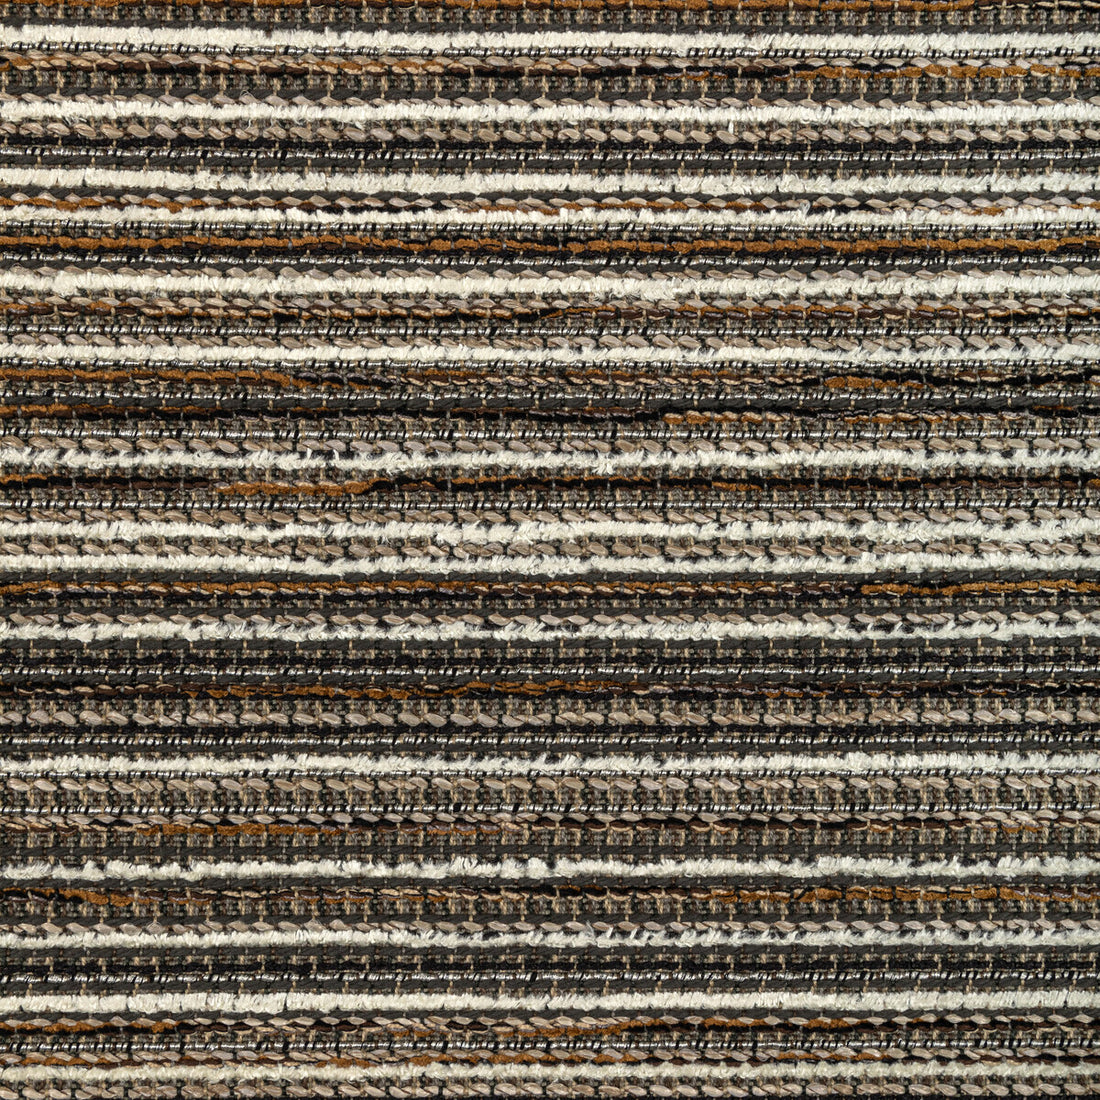 Kravet Design fabric in 36416-86 color - pattern 36416.86.0 - by Kravet Design in the Performance Crypton Home collection